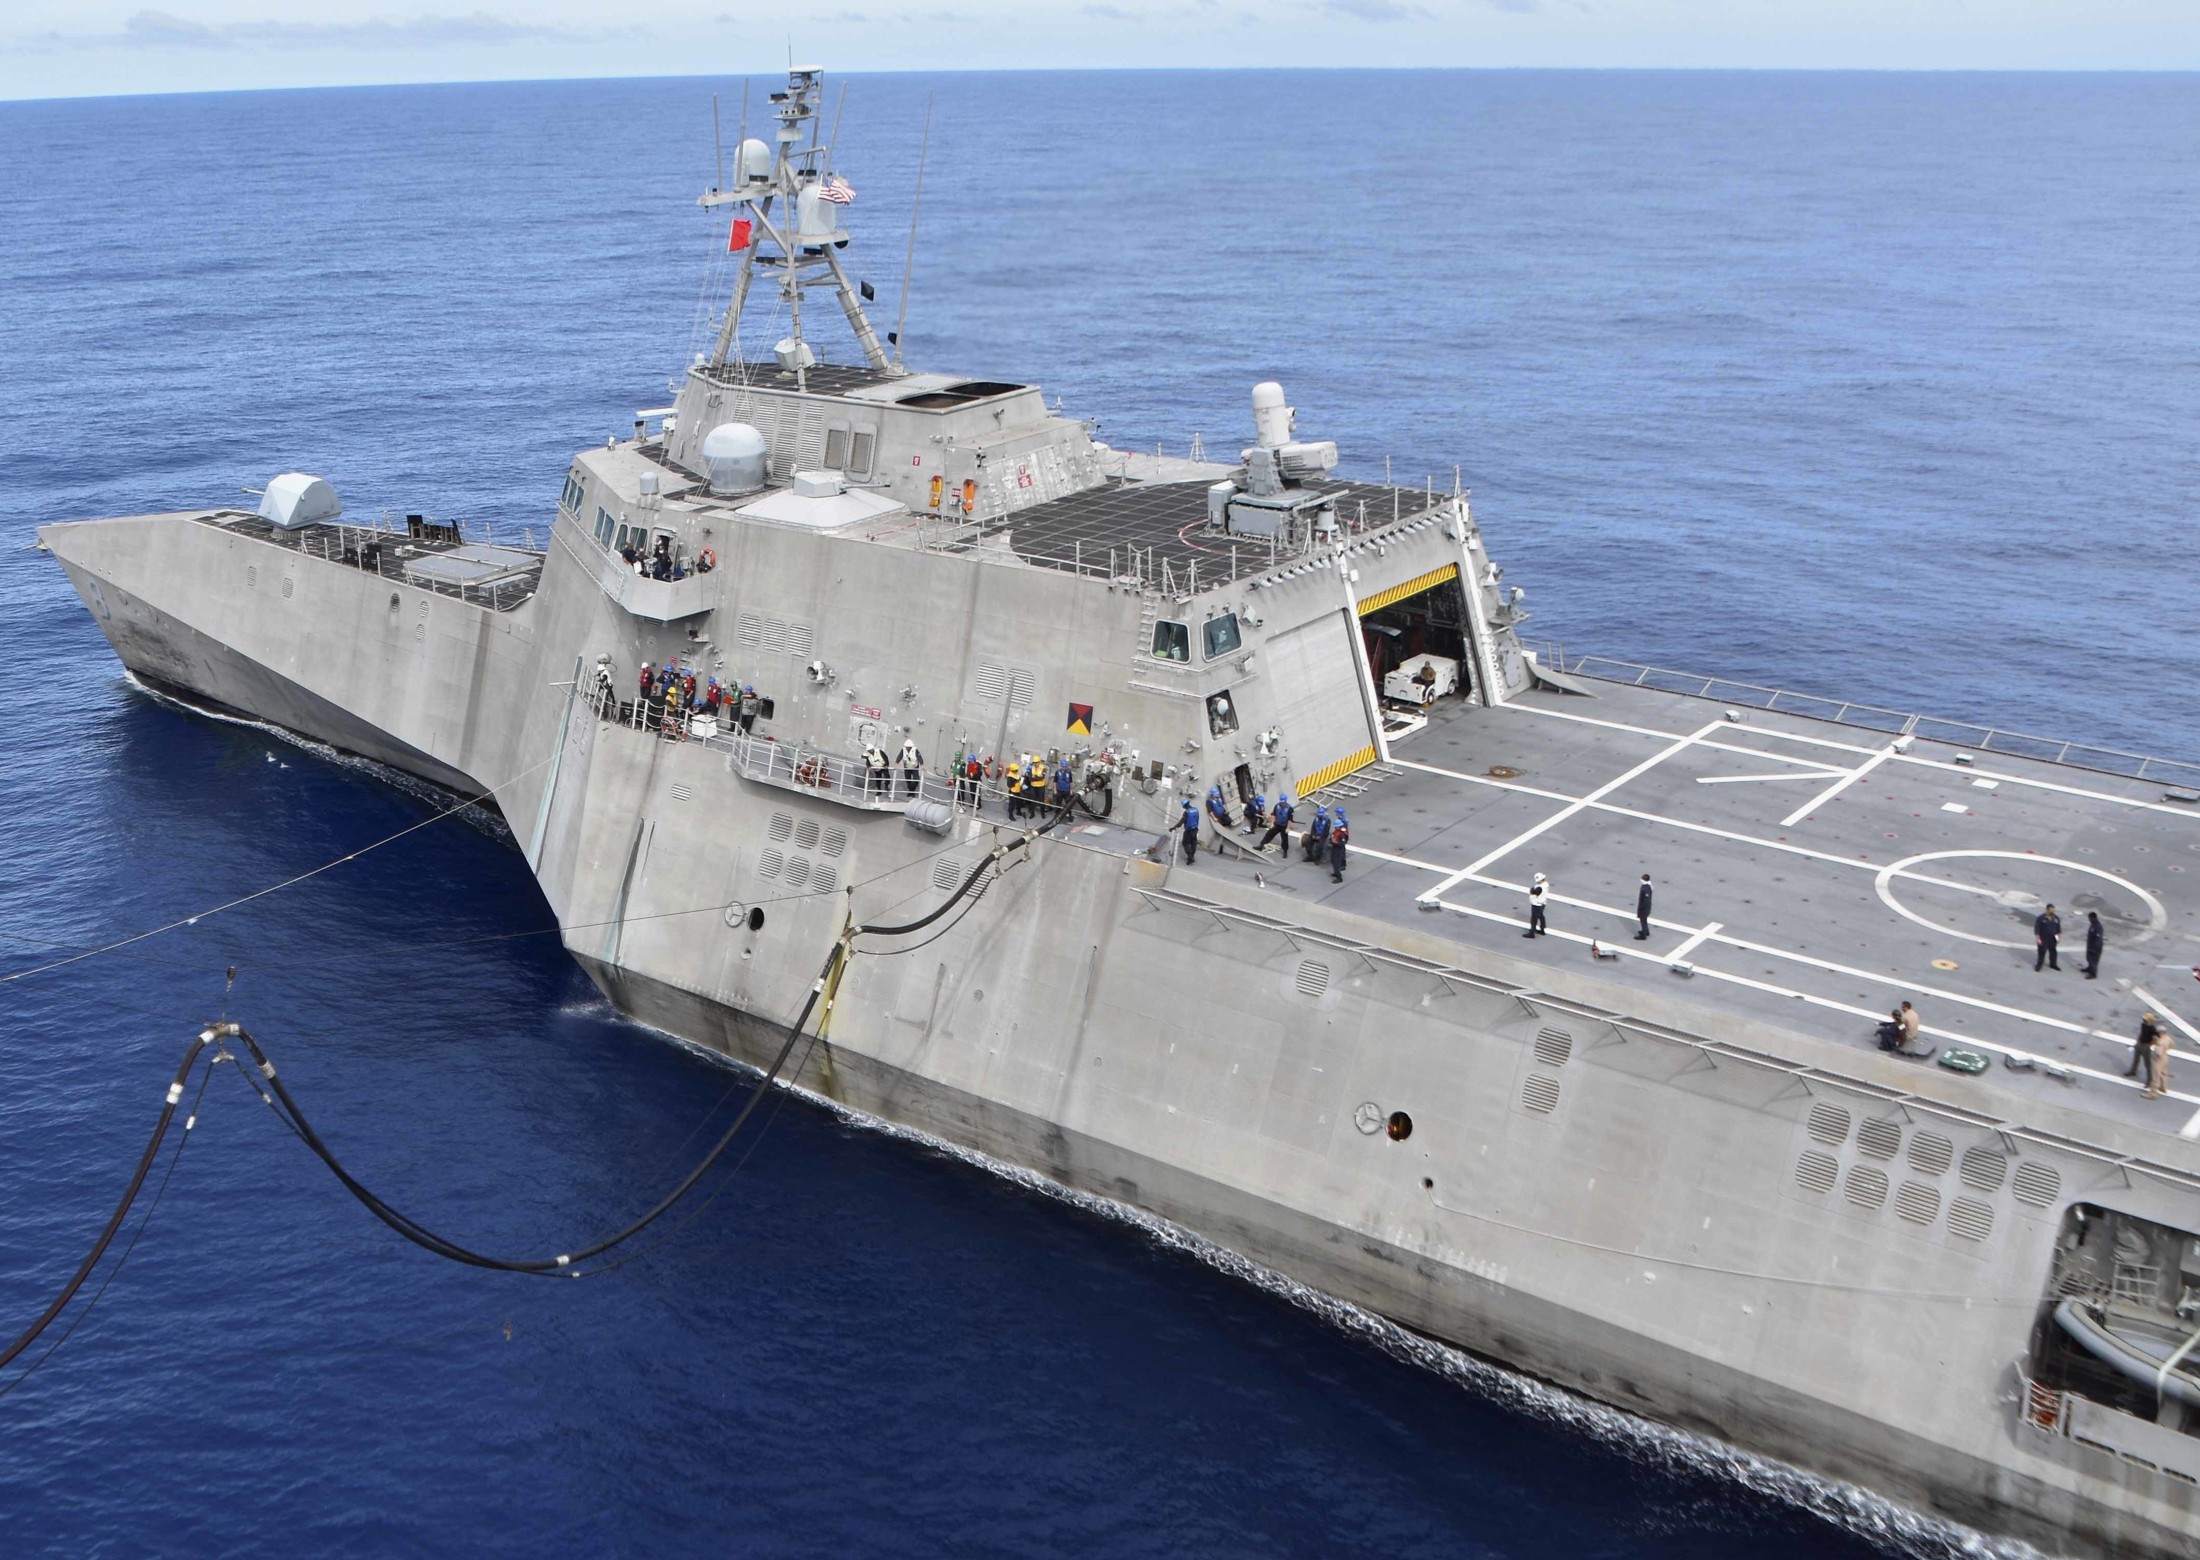 lcs-8 uss montgomery independence class littoral combat ship us navy 15 philippine sea